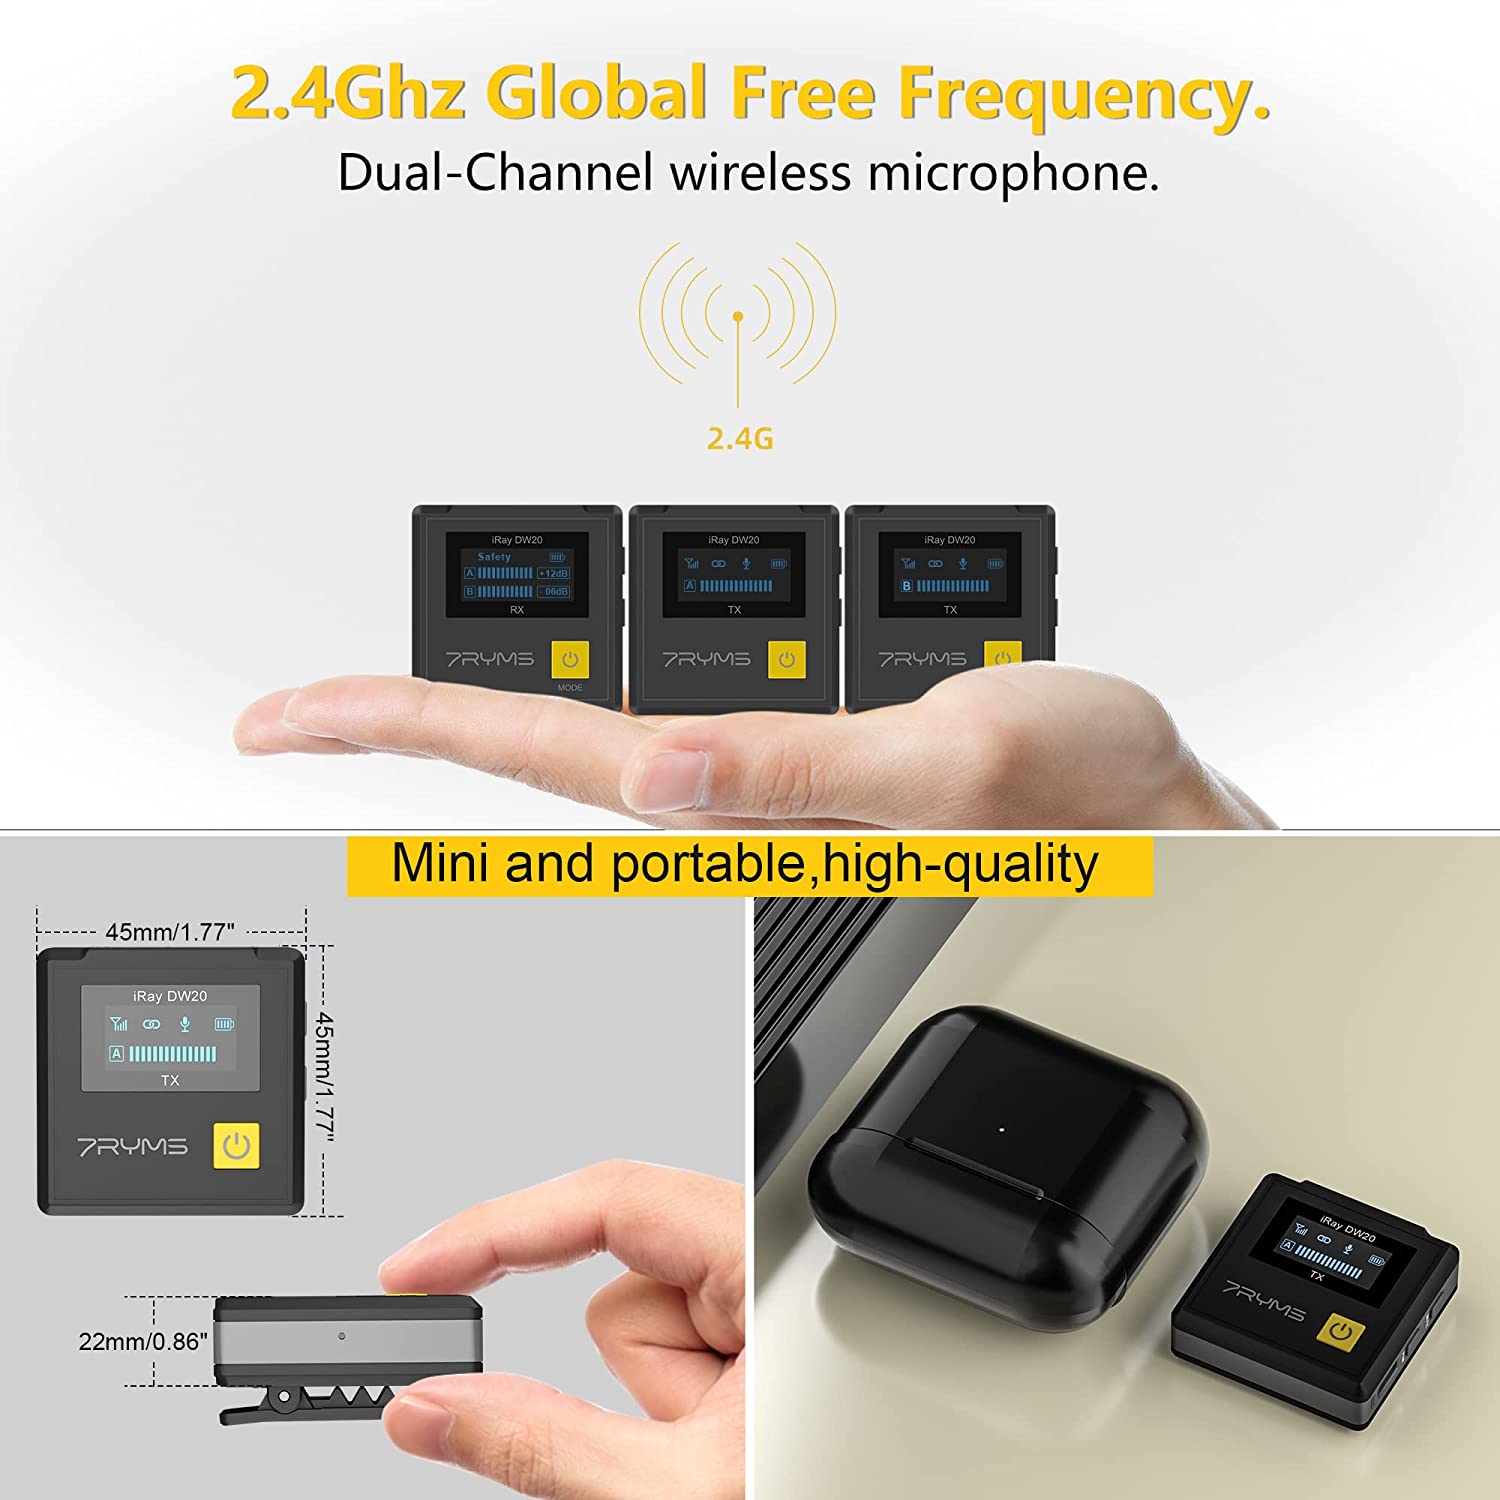 7RYMS iRAY DW20 PRO 2.4G  Global Free frequency Dual Wireless Lapel Microphone -2